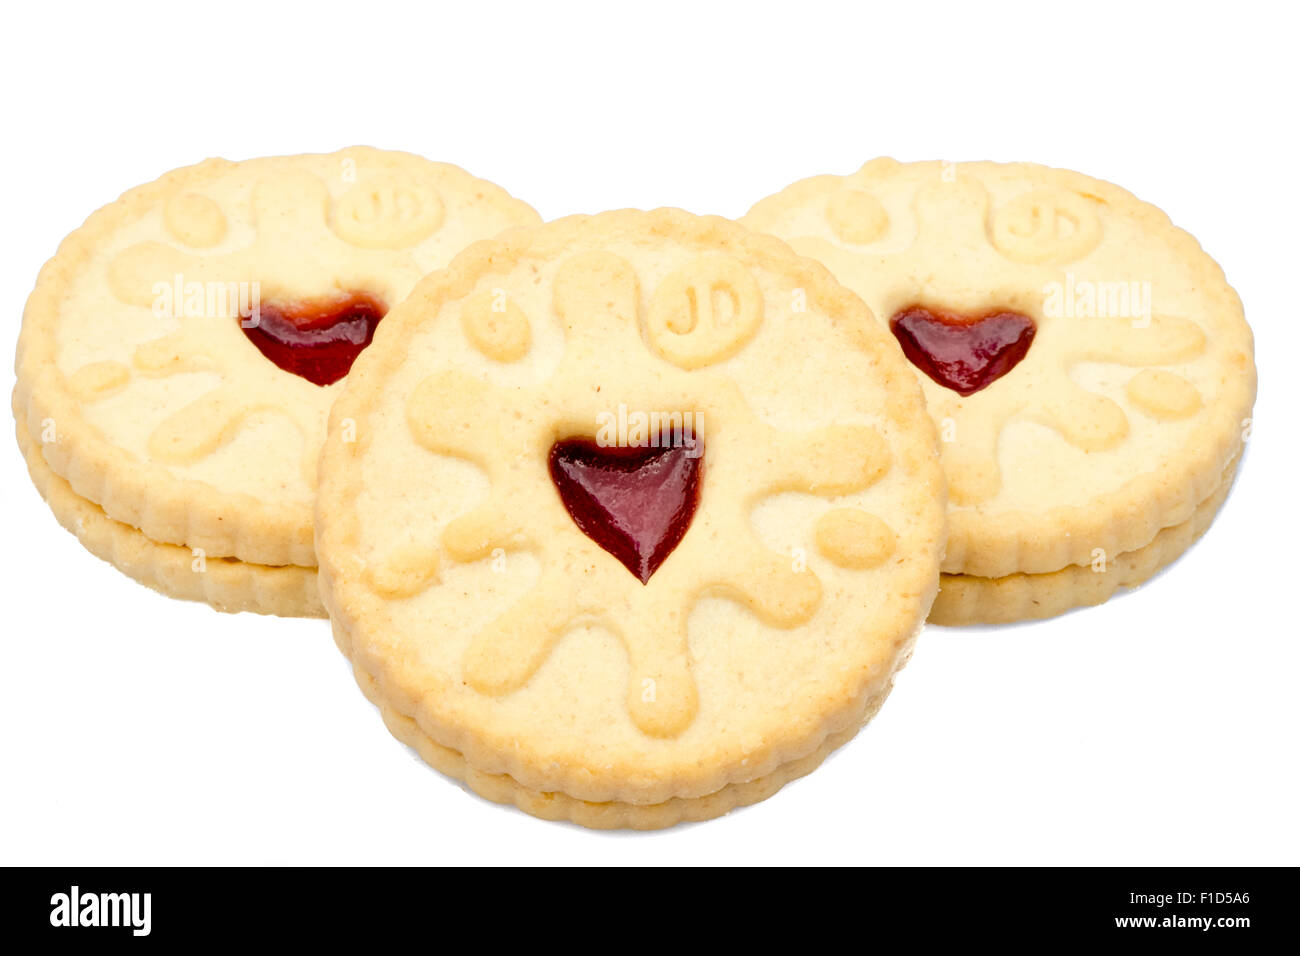 Jammie Dodger biscuits cut out or isolated on a white background, UK. Stock Photo